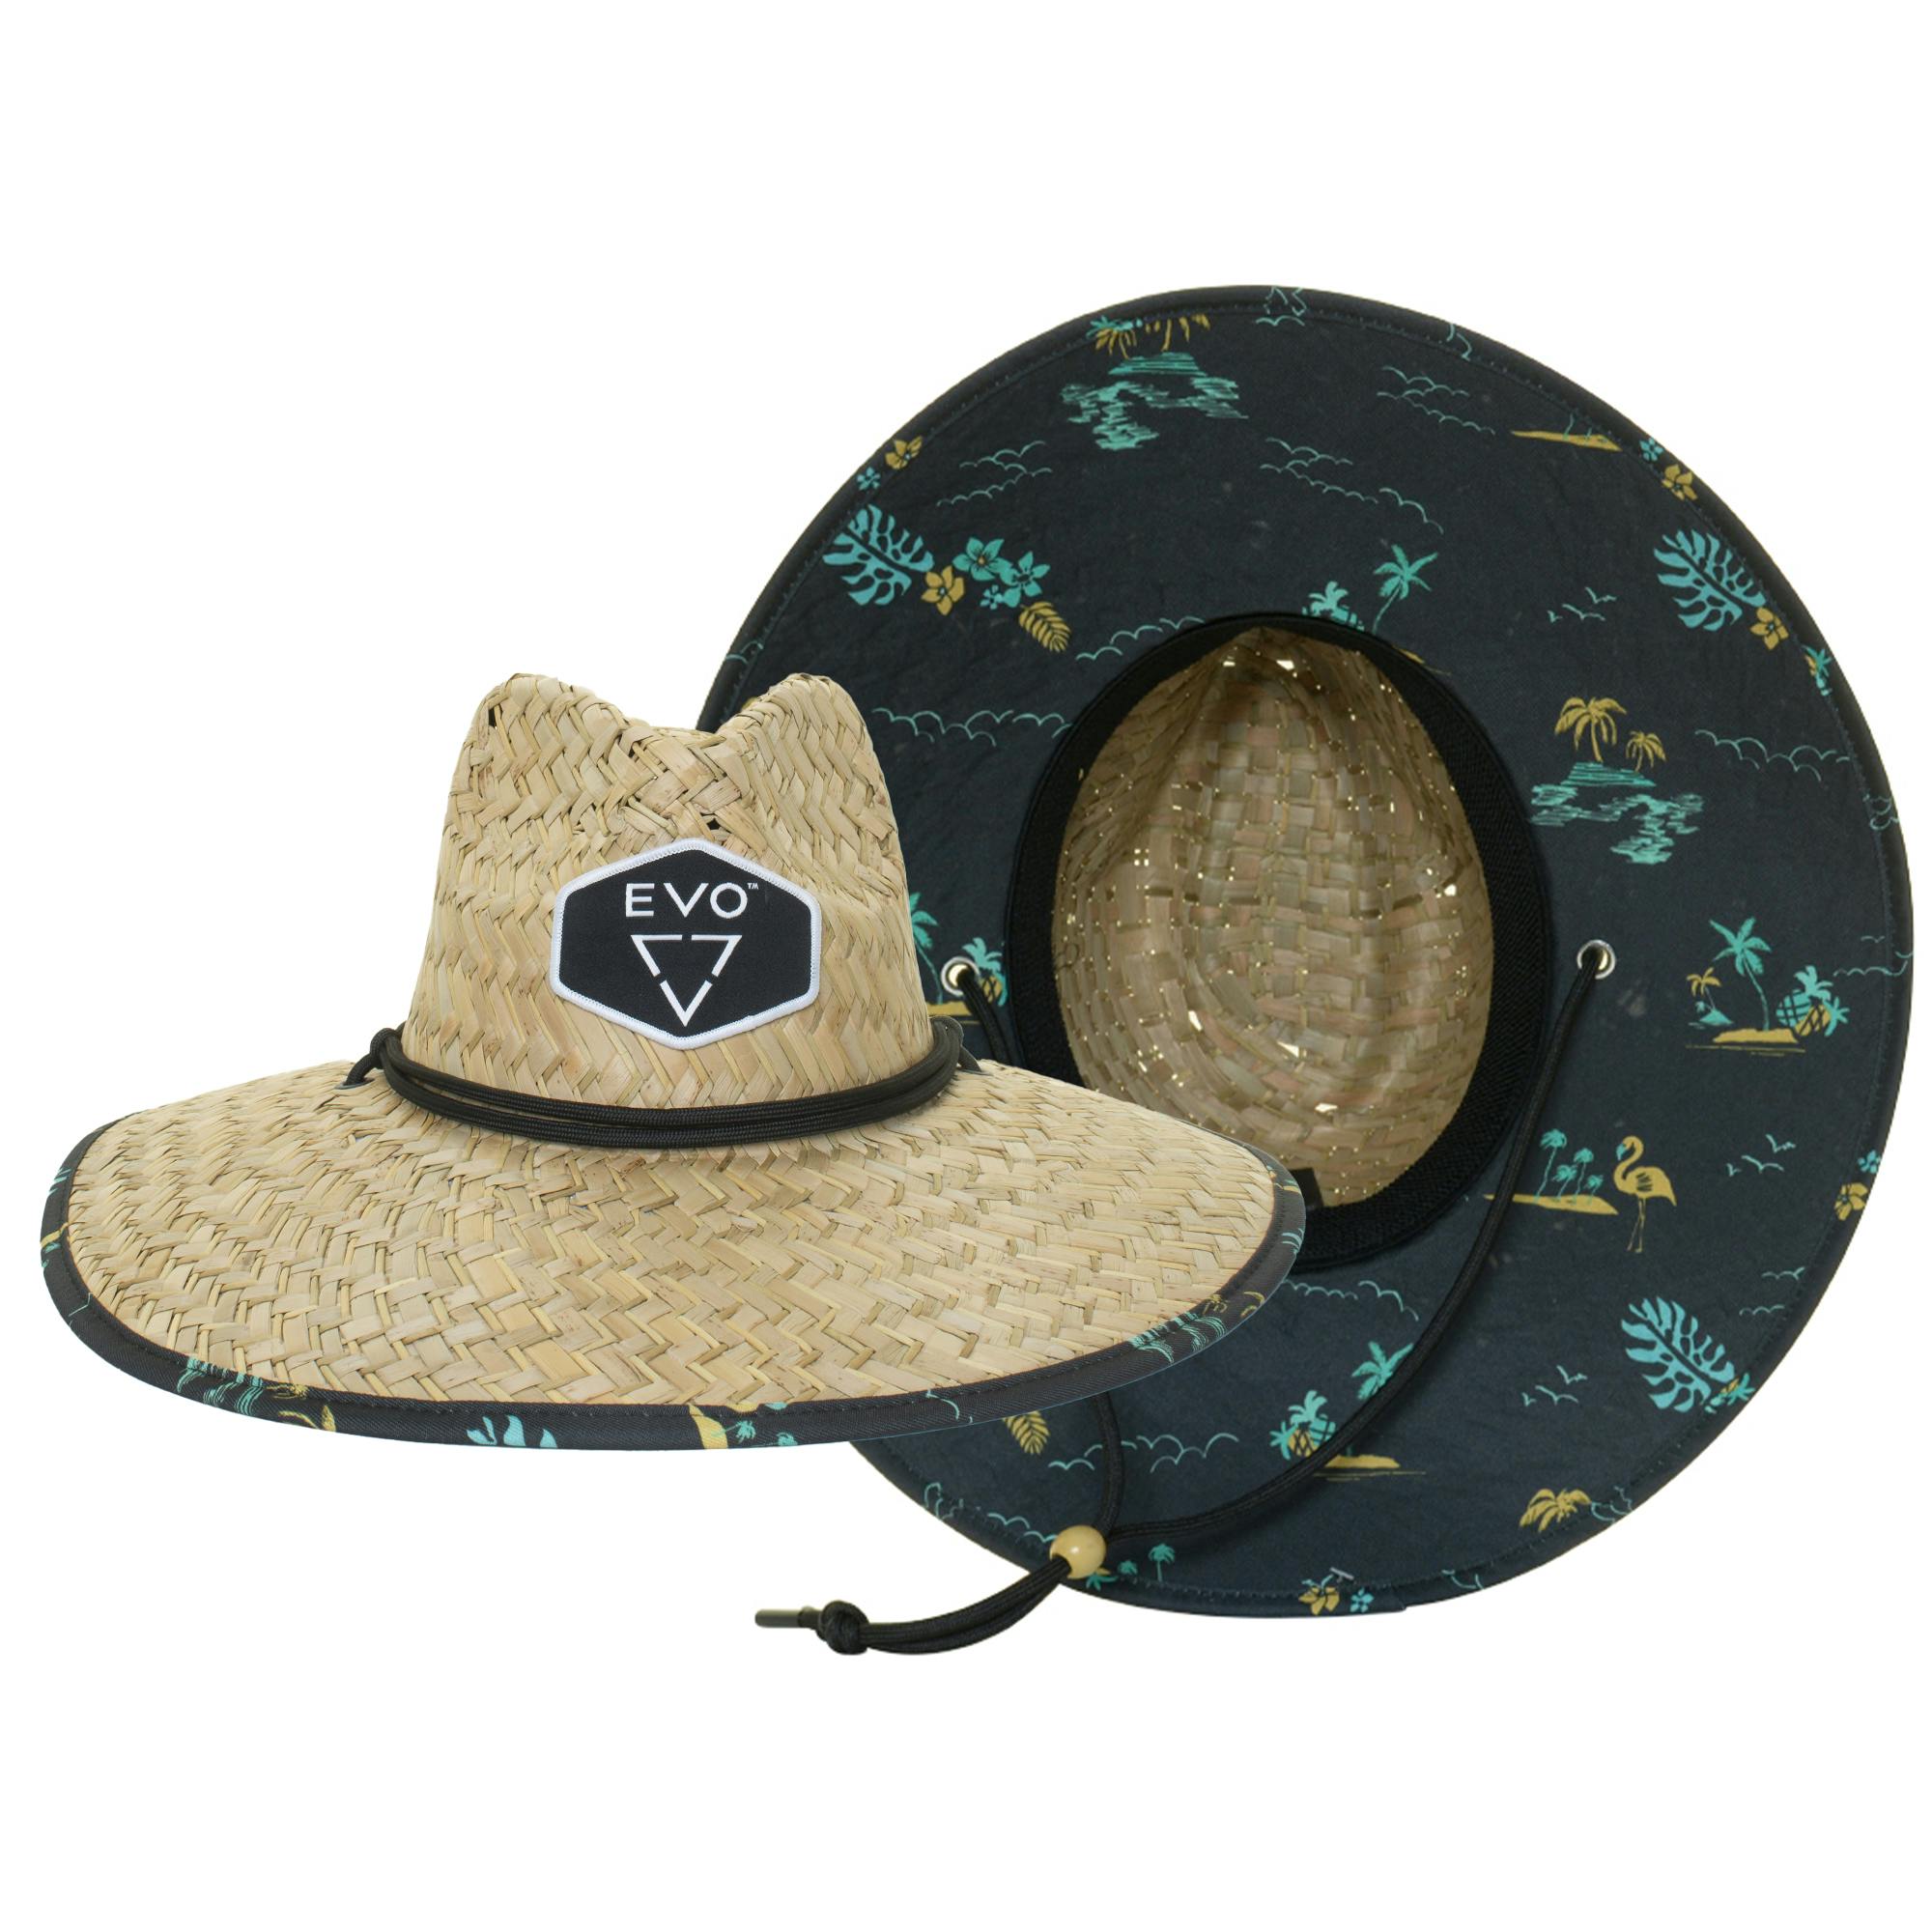 EVO Straw Lifeguard Hat - Tunnels (Men's) Front and Bottom View